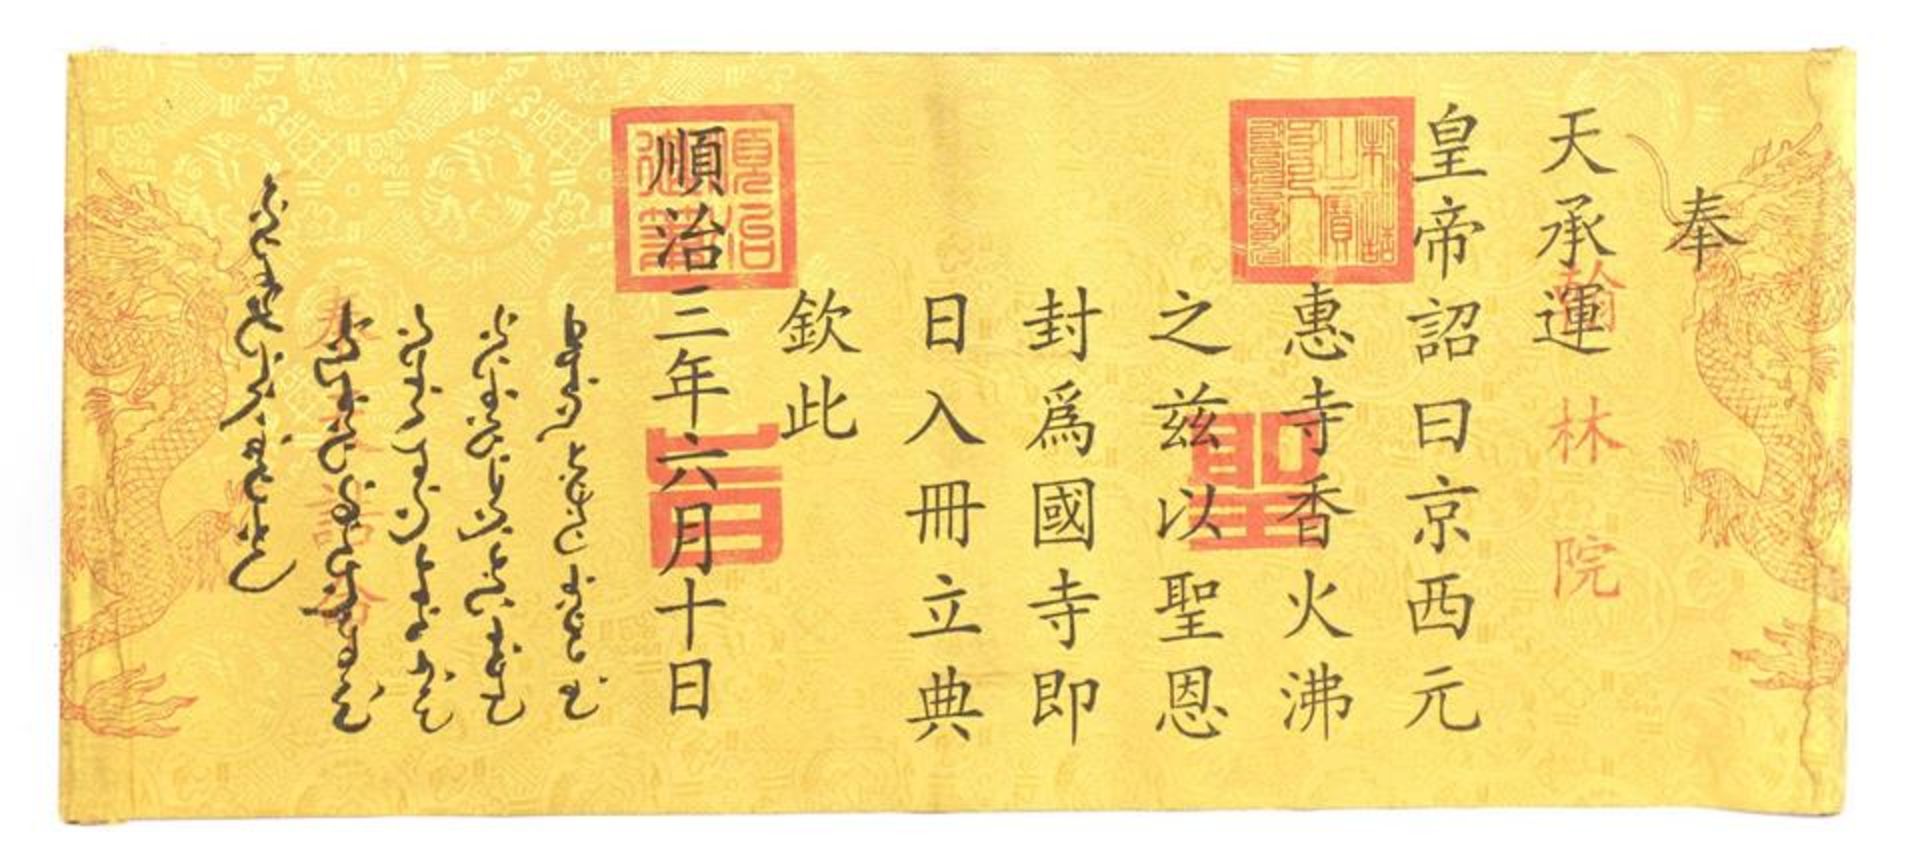 Textile roll with Chinese text, 75x33 cm